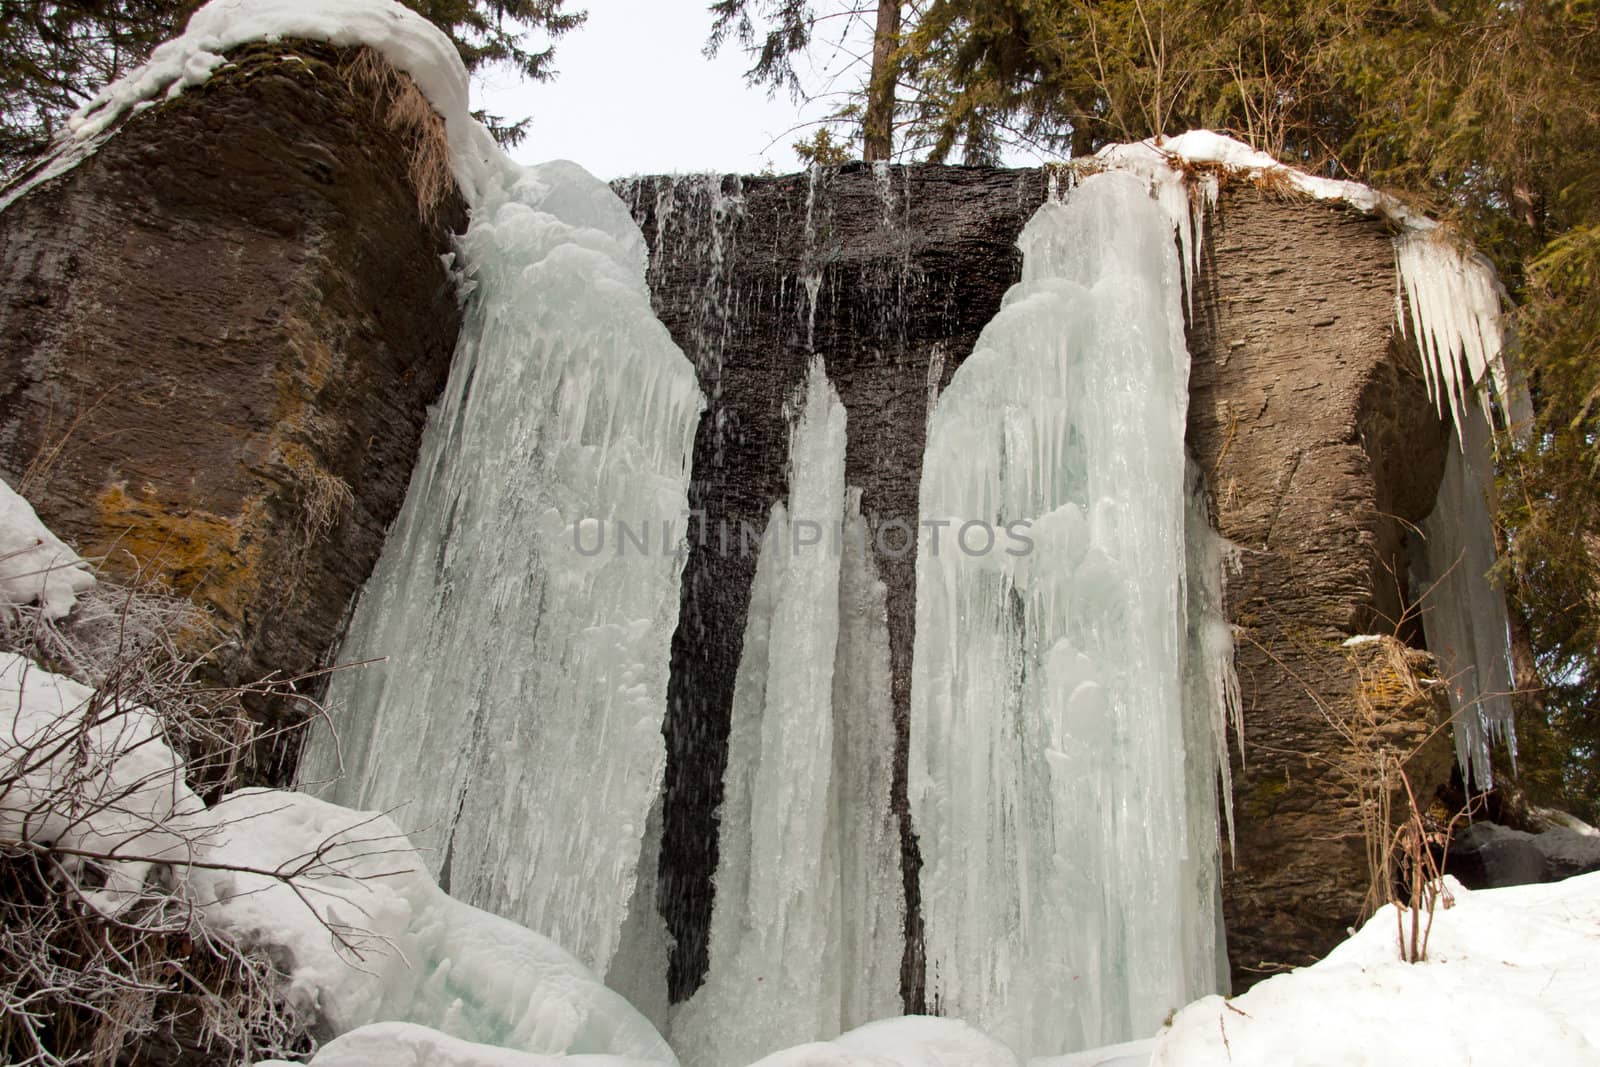 A still, small-sized, frozen waterfall surrounded by pine trees